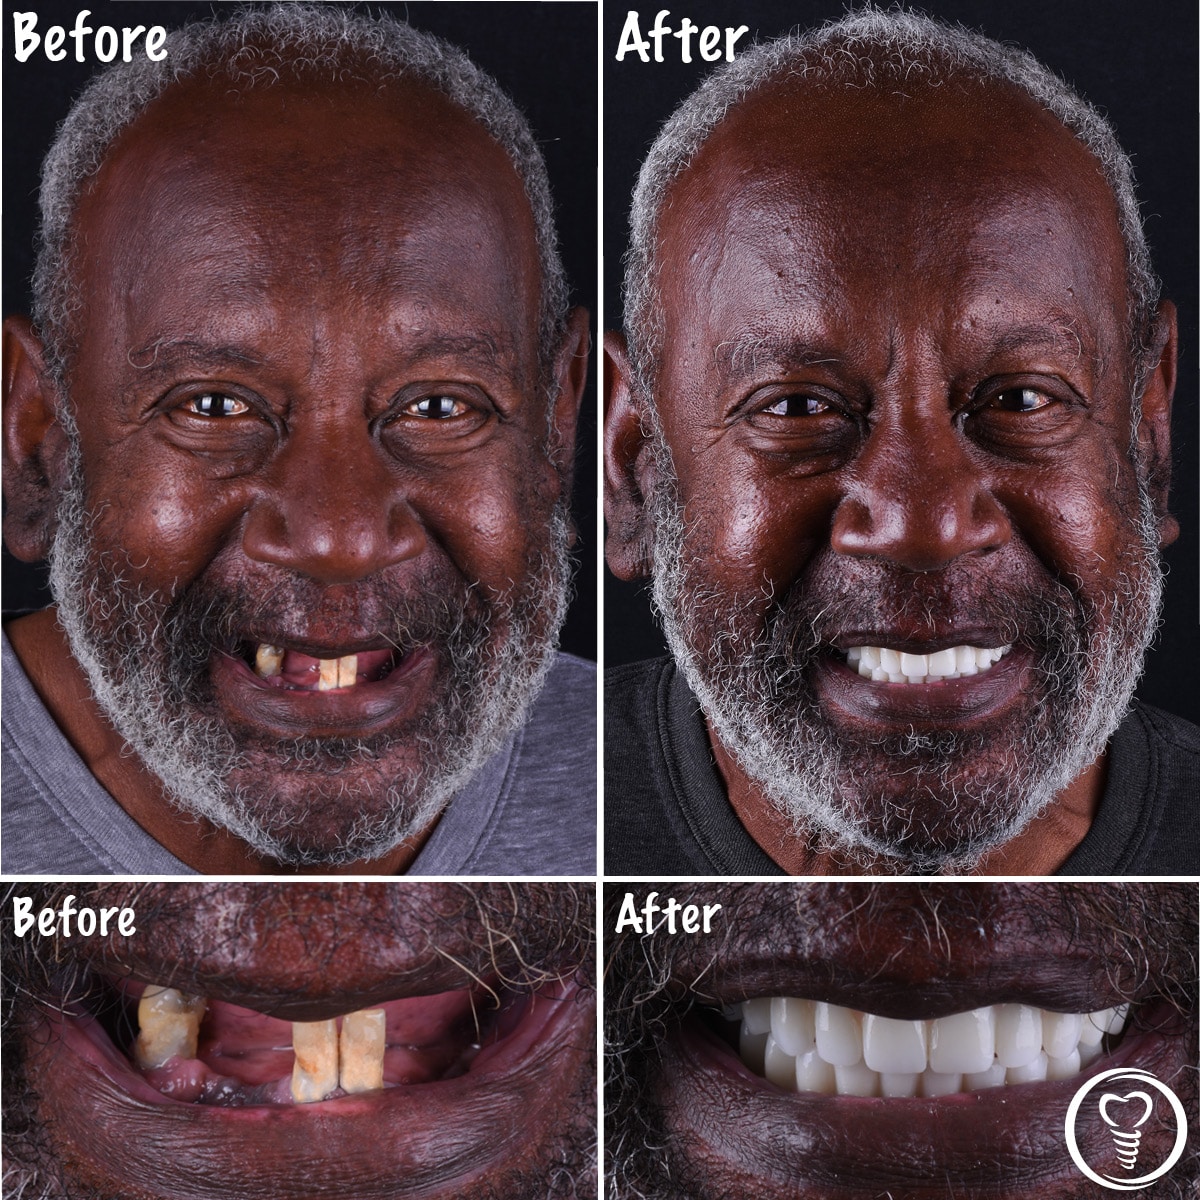 A mature guy knew the impact of having healthy teeth and gums.